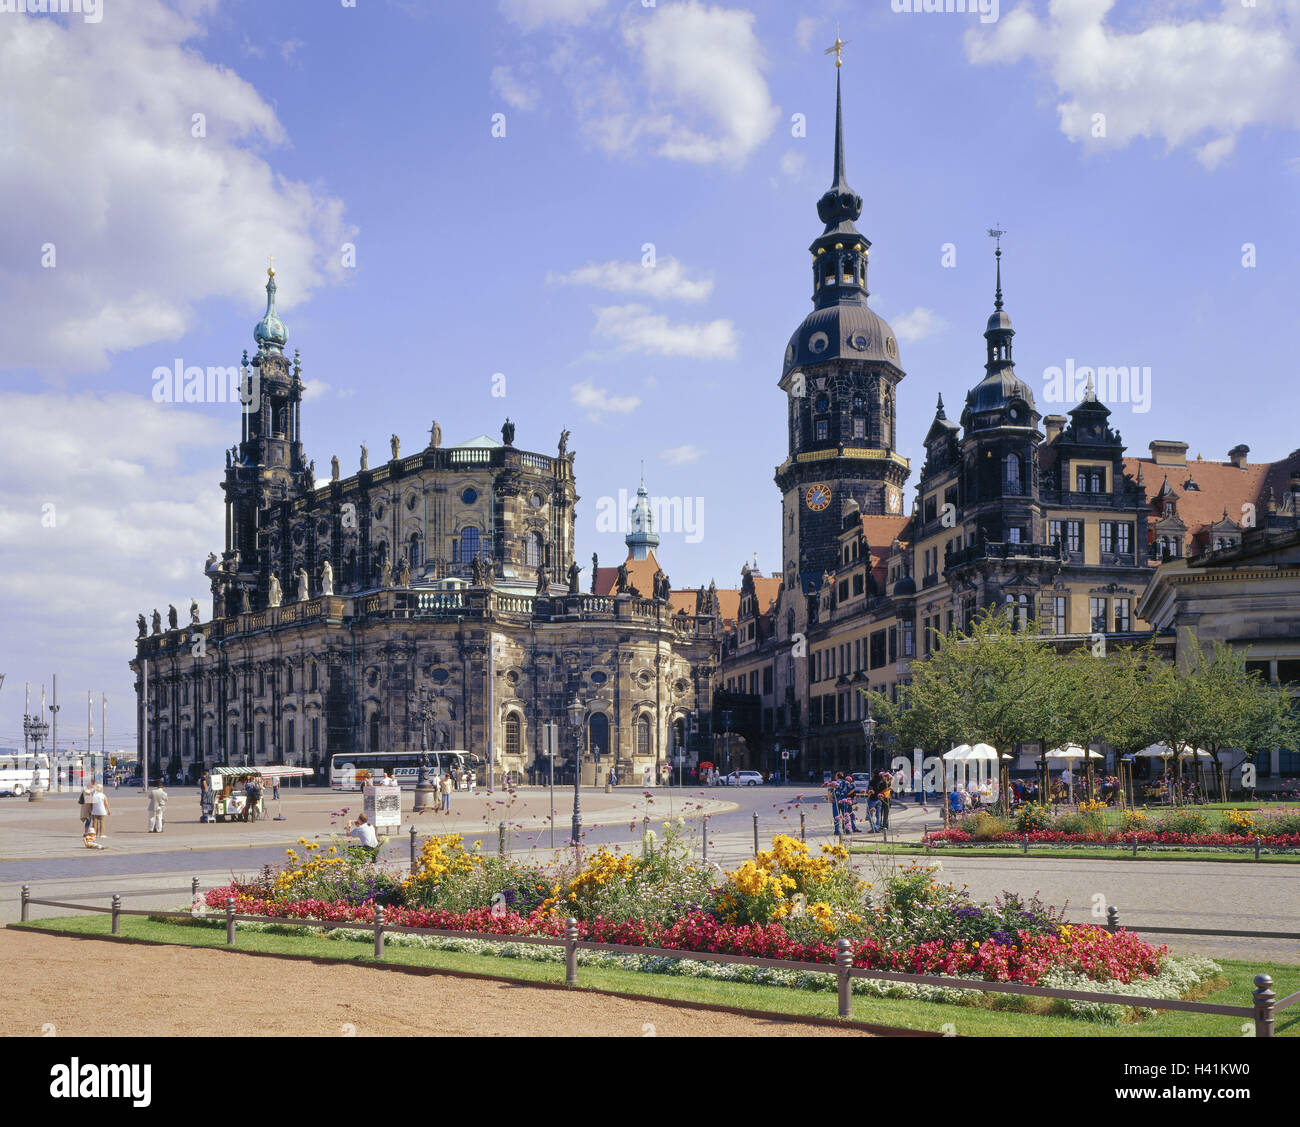 Germany, Saxony, Dresden, theatre square, court church, residence lock, househusband's attack, Europe, town, state capital, part town, place of interest, lock, residence, structures, buildings, architecture, church, church, sacred construction, tower, 101 m high, culture, cultural setting, tourism, flowerbeds Stock Photo